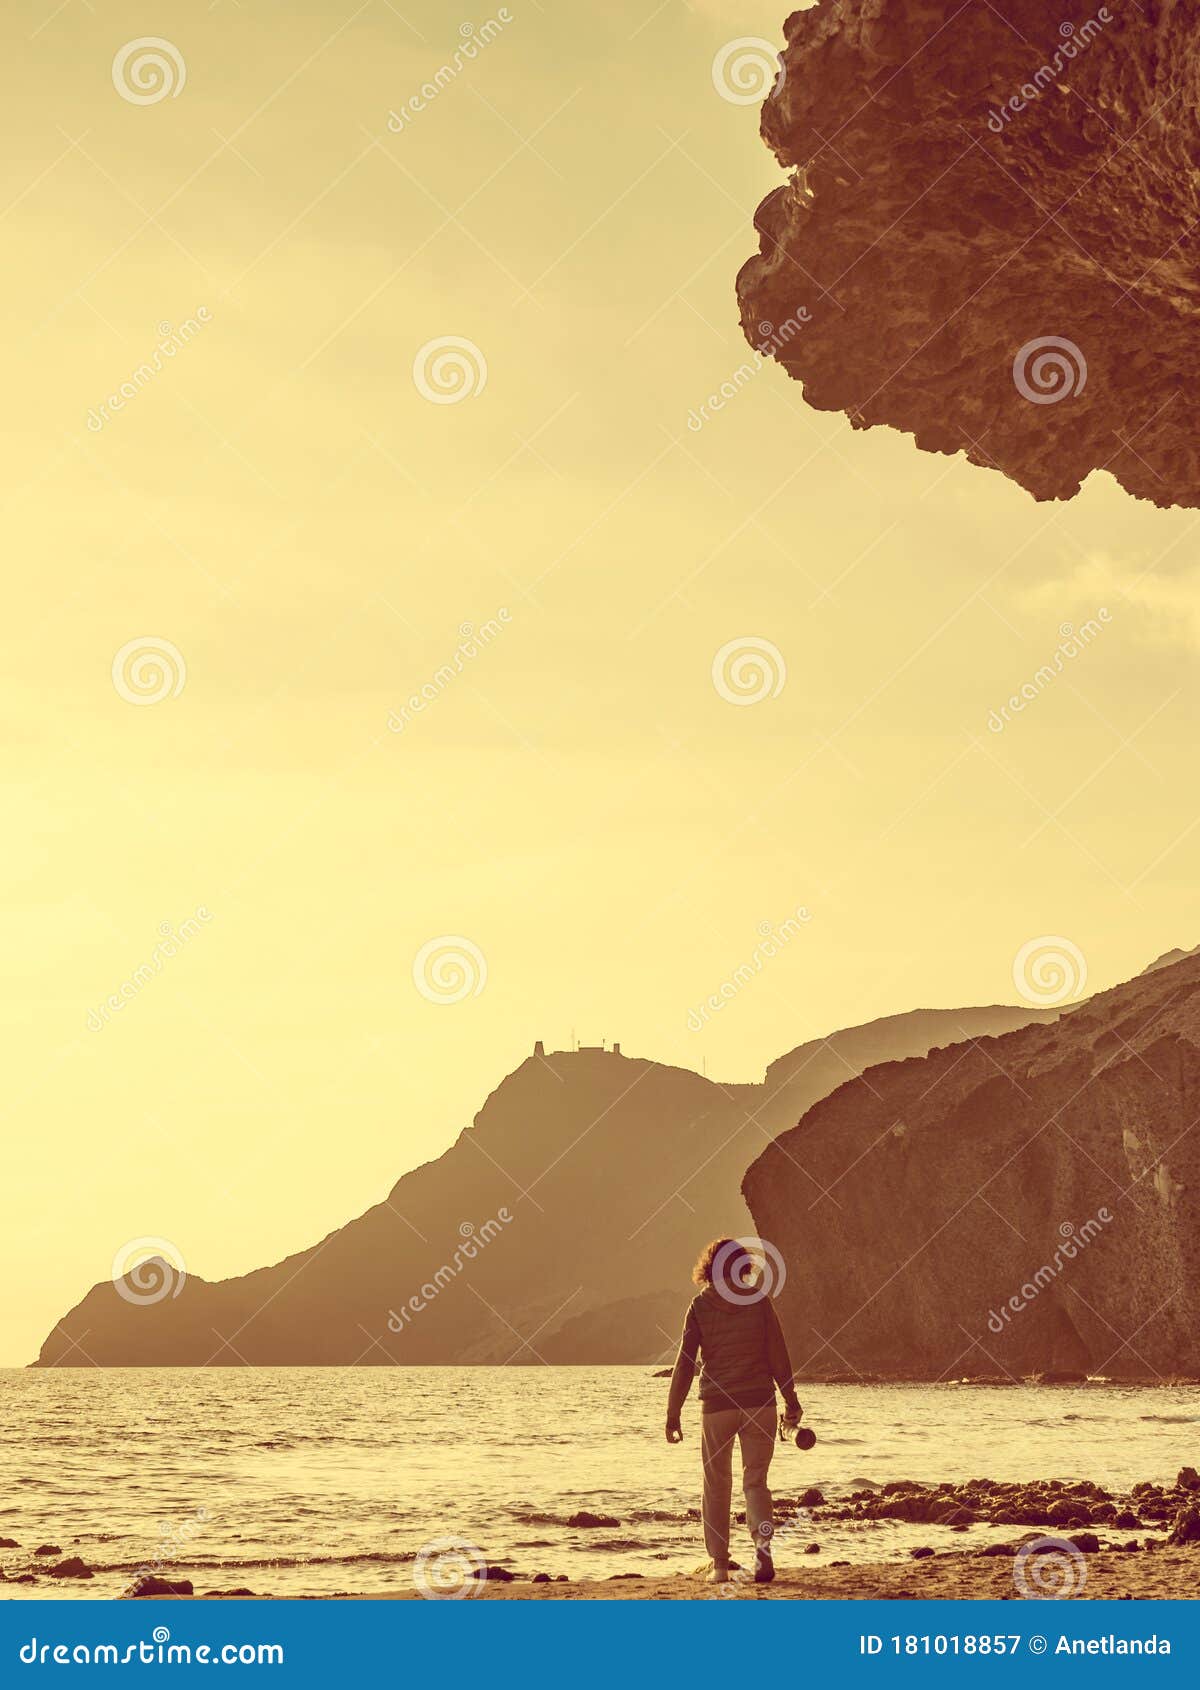 Woman with Camera on Monsul Beach, Spain Stock Image - Image of woman,  trip: 181018857